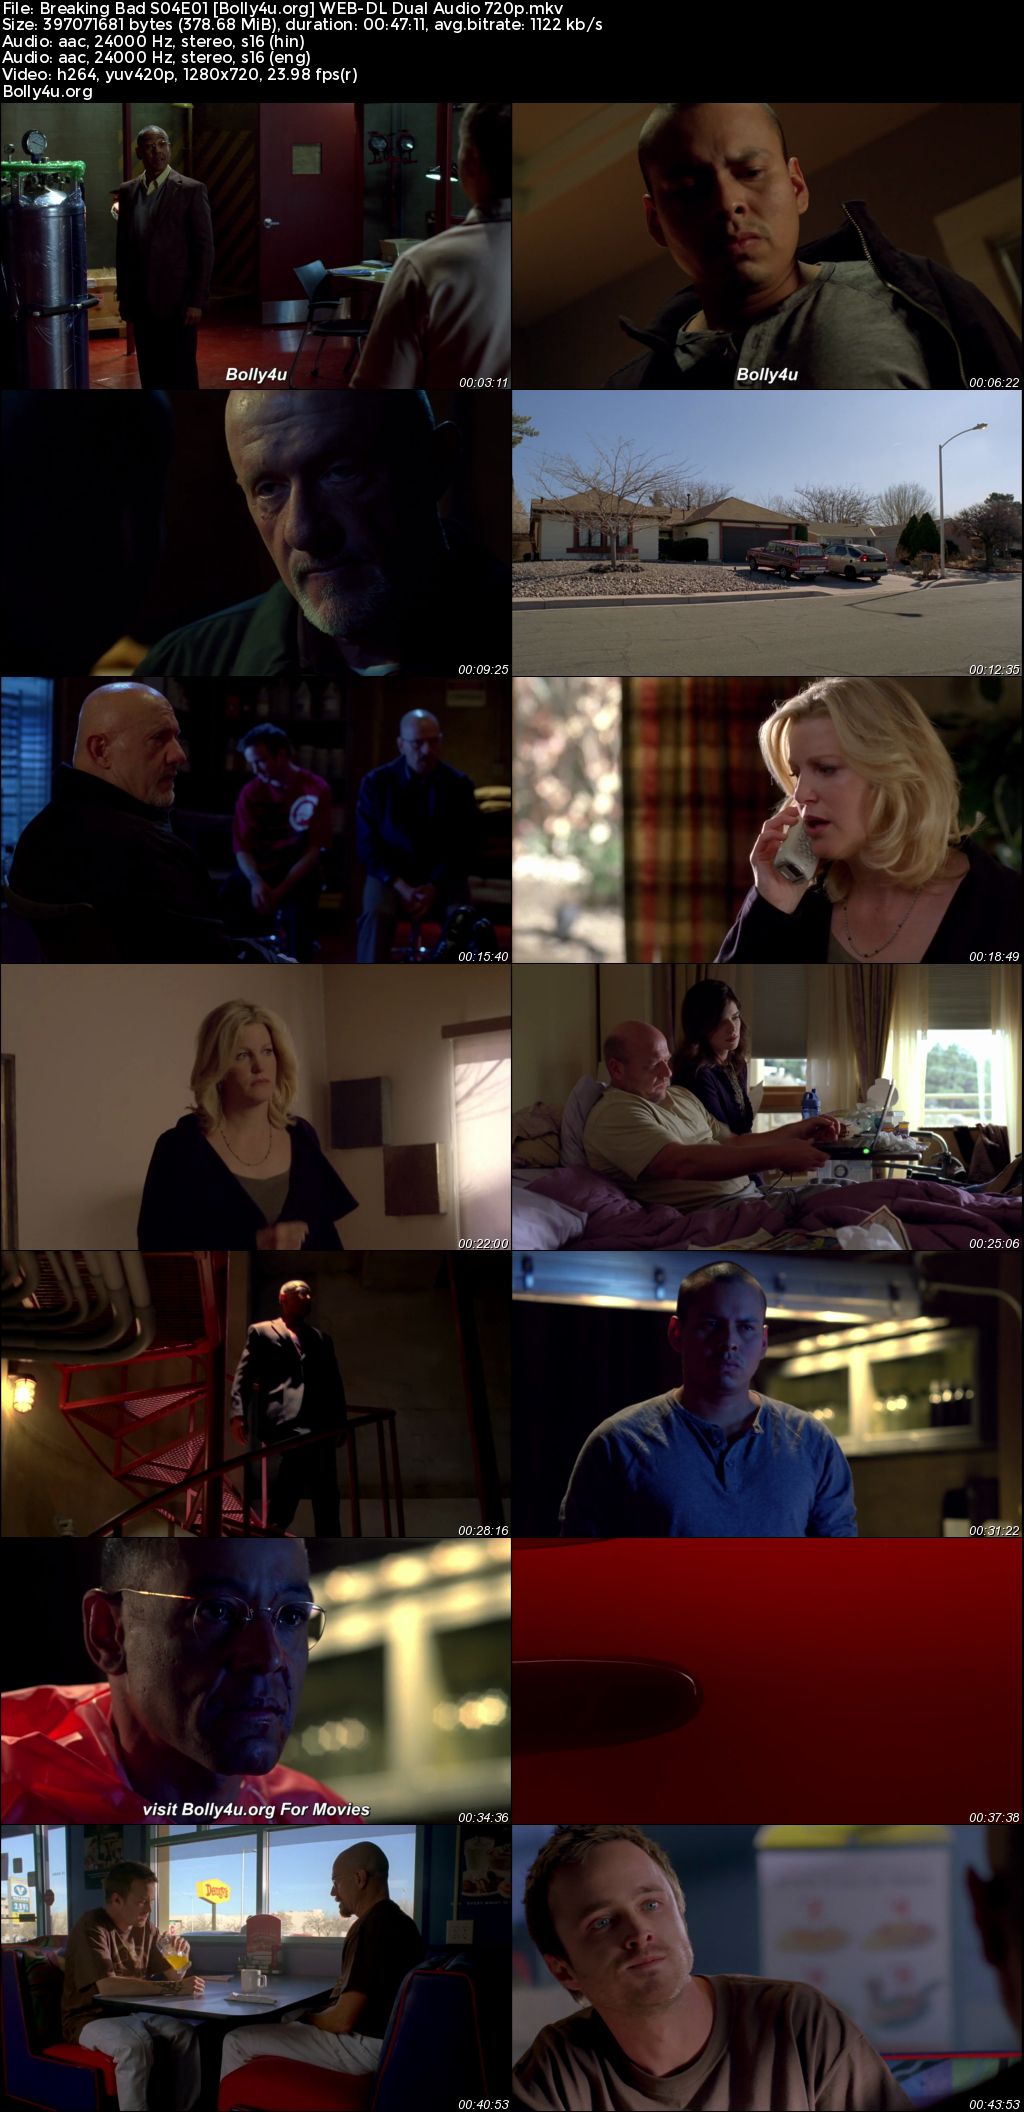 Breaking Bad 2011 BluRay Hindi Dual Audio ORG S04 Complete Download 720p